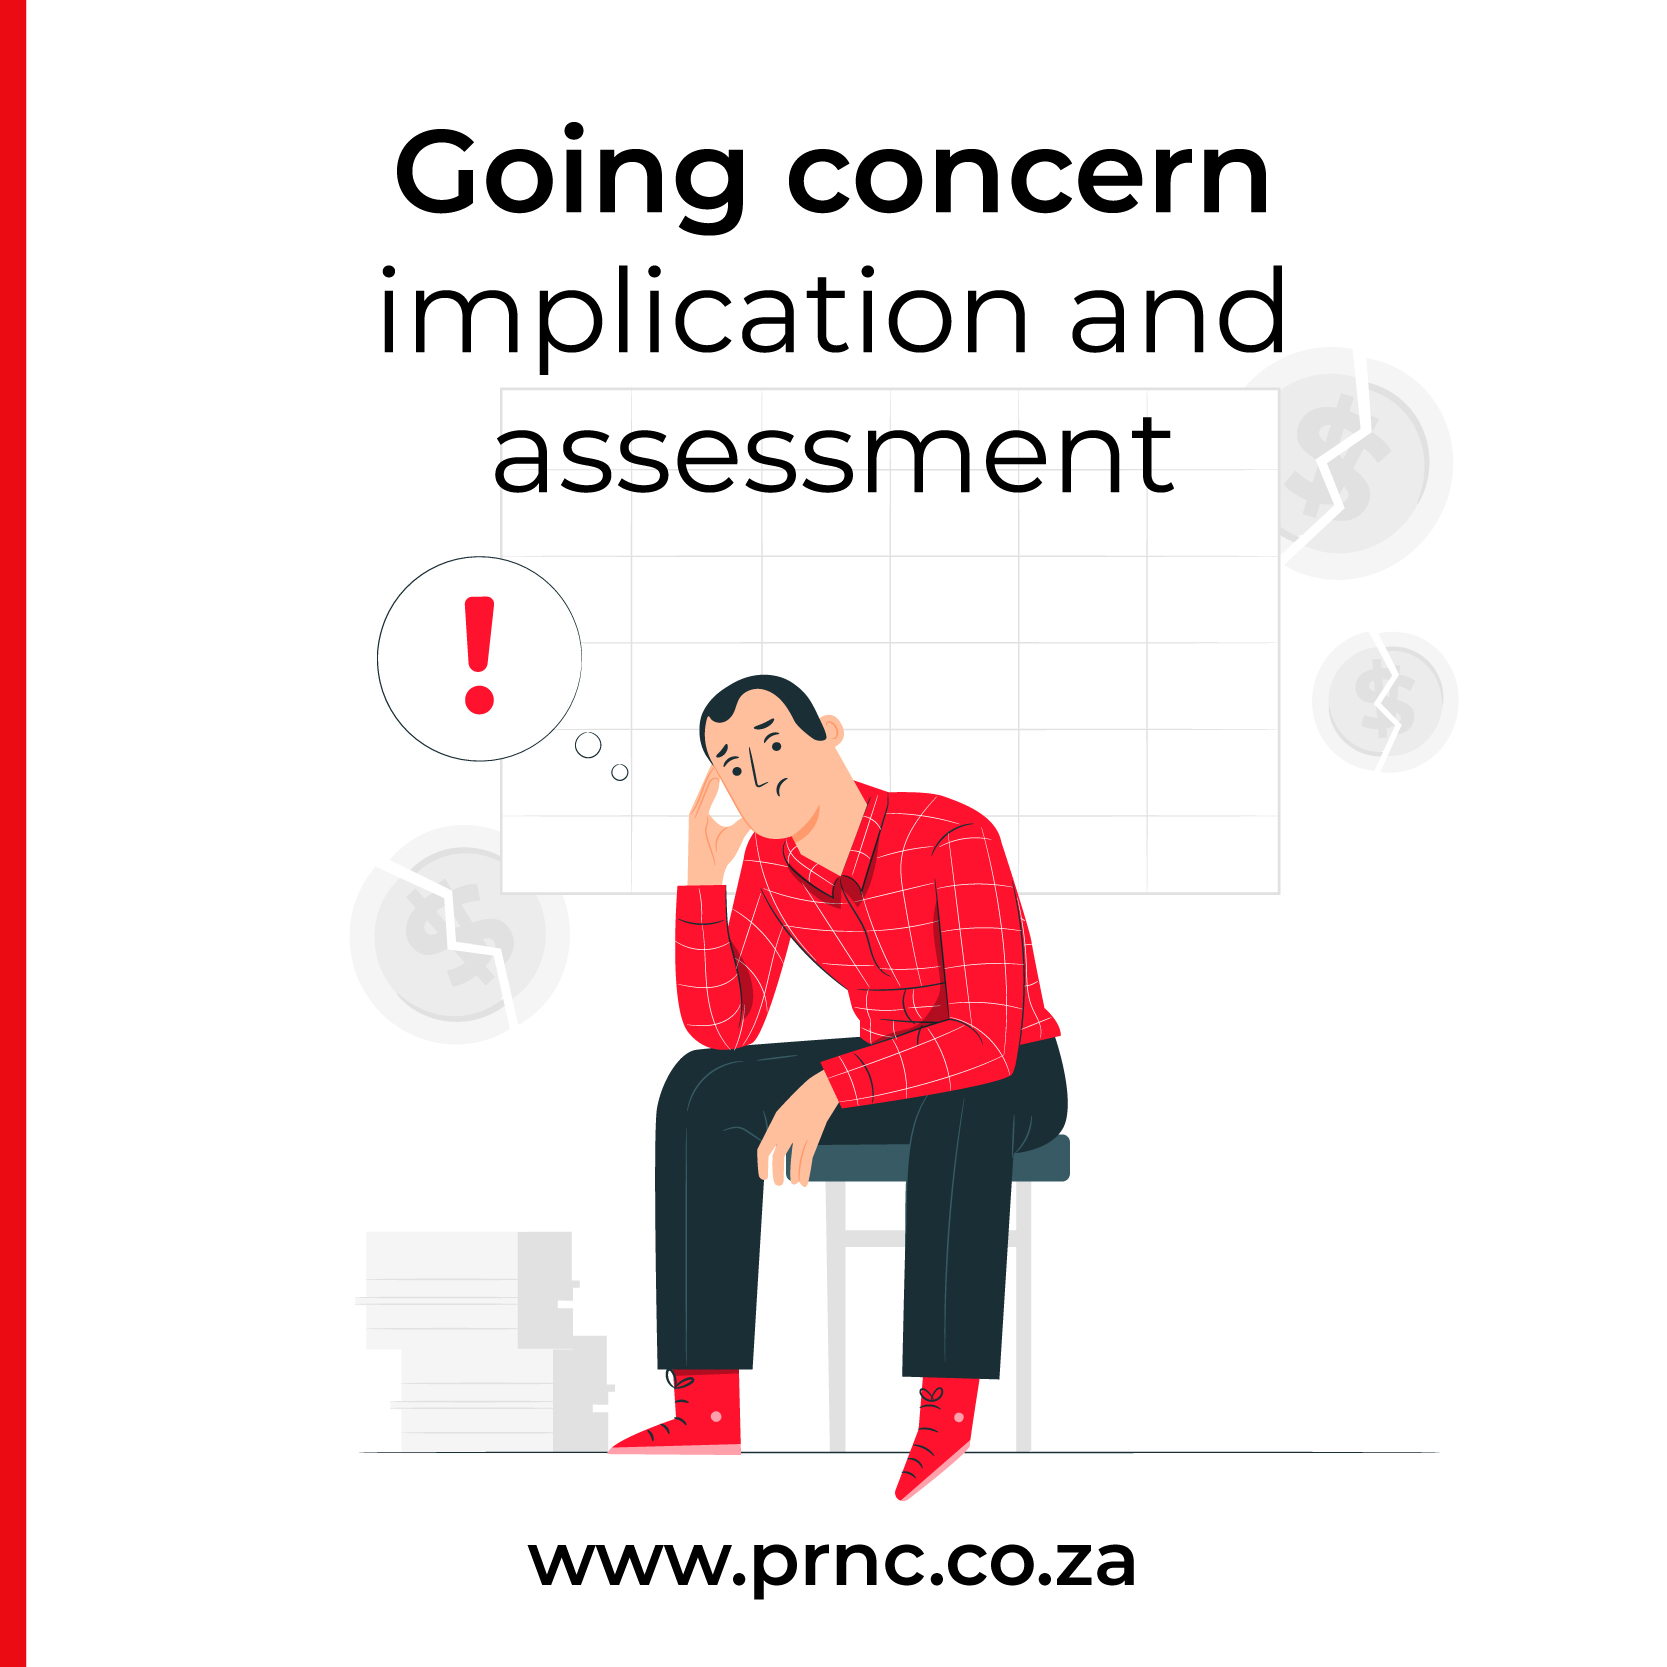 Going concern implication and assessment